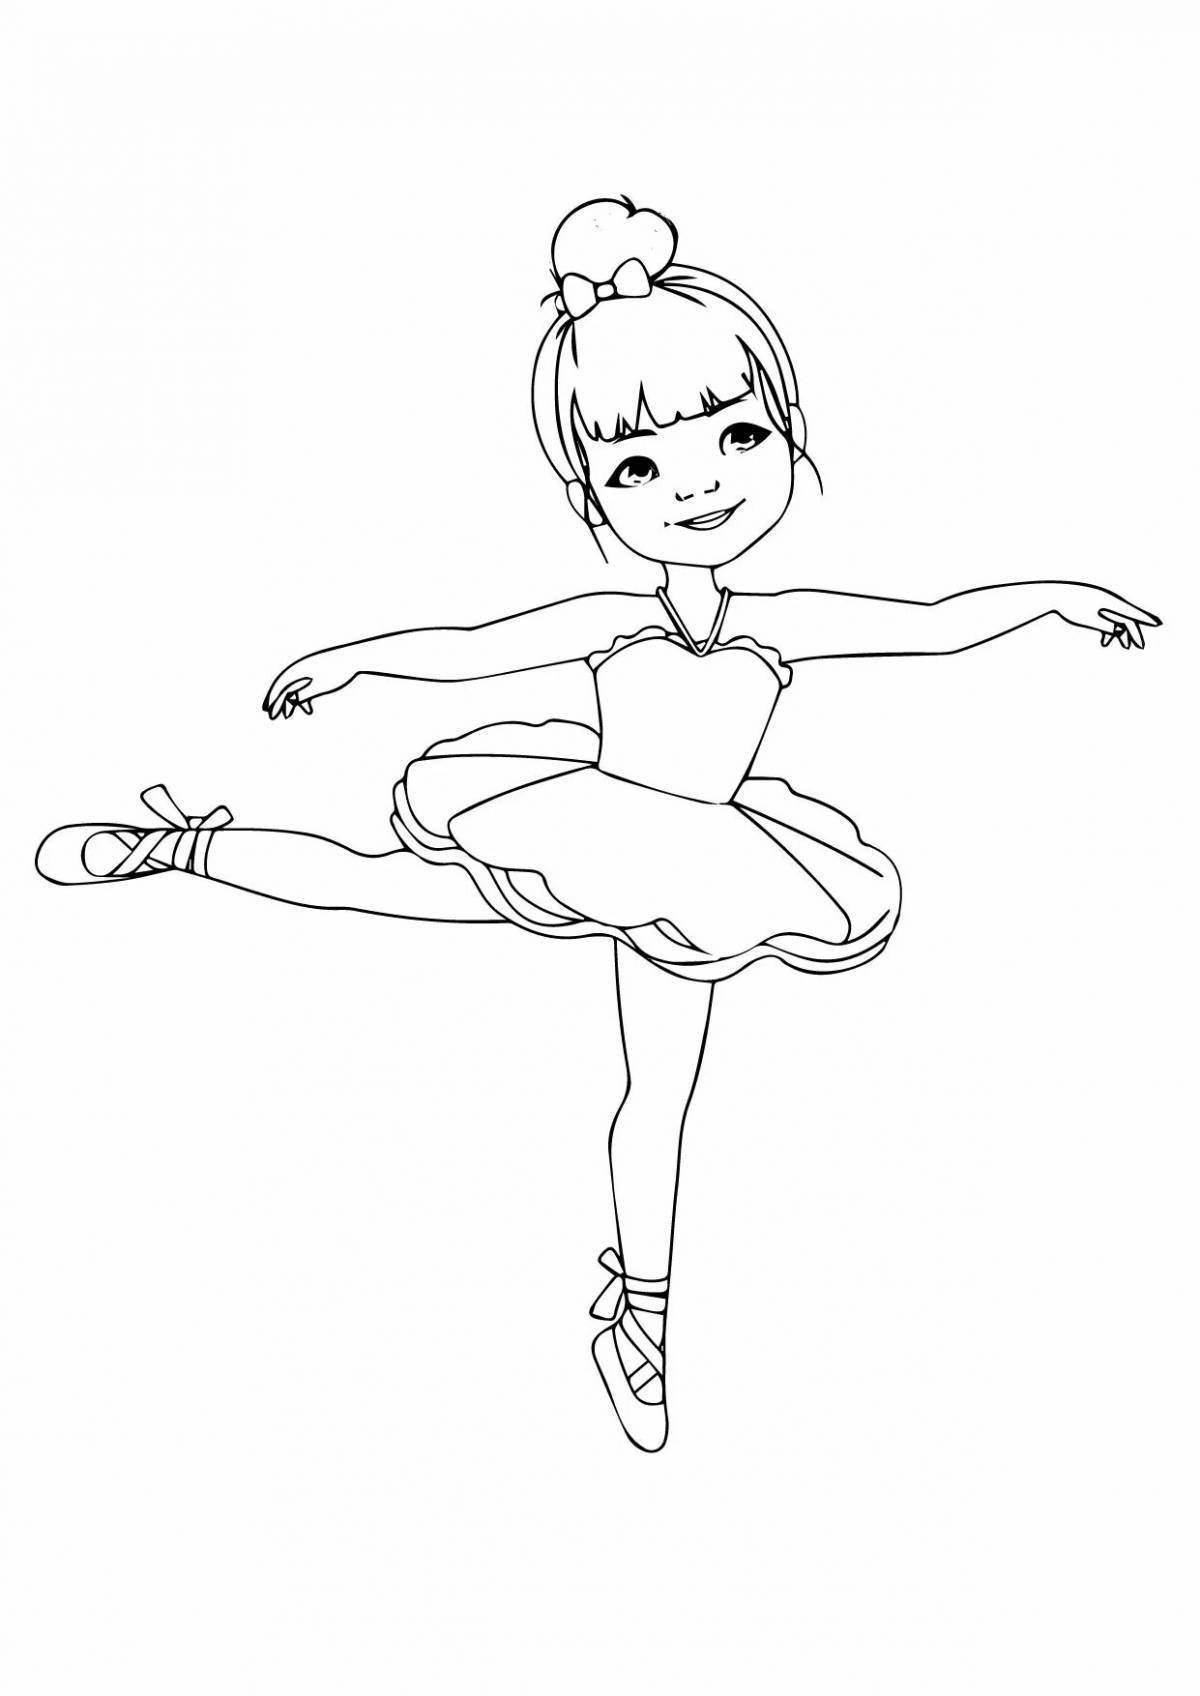 Live ballerina coloring book for girls